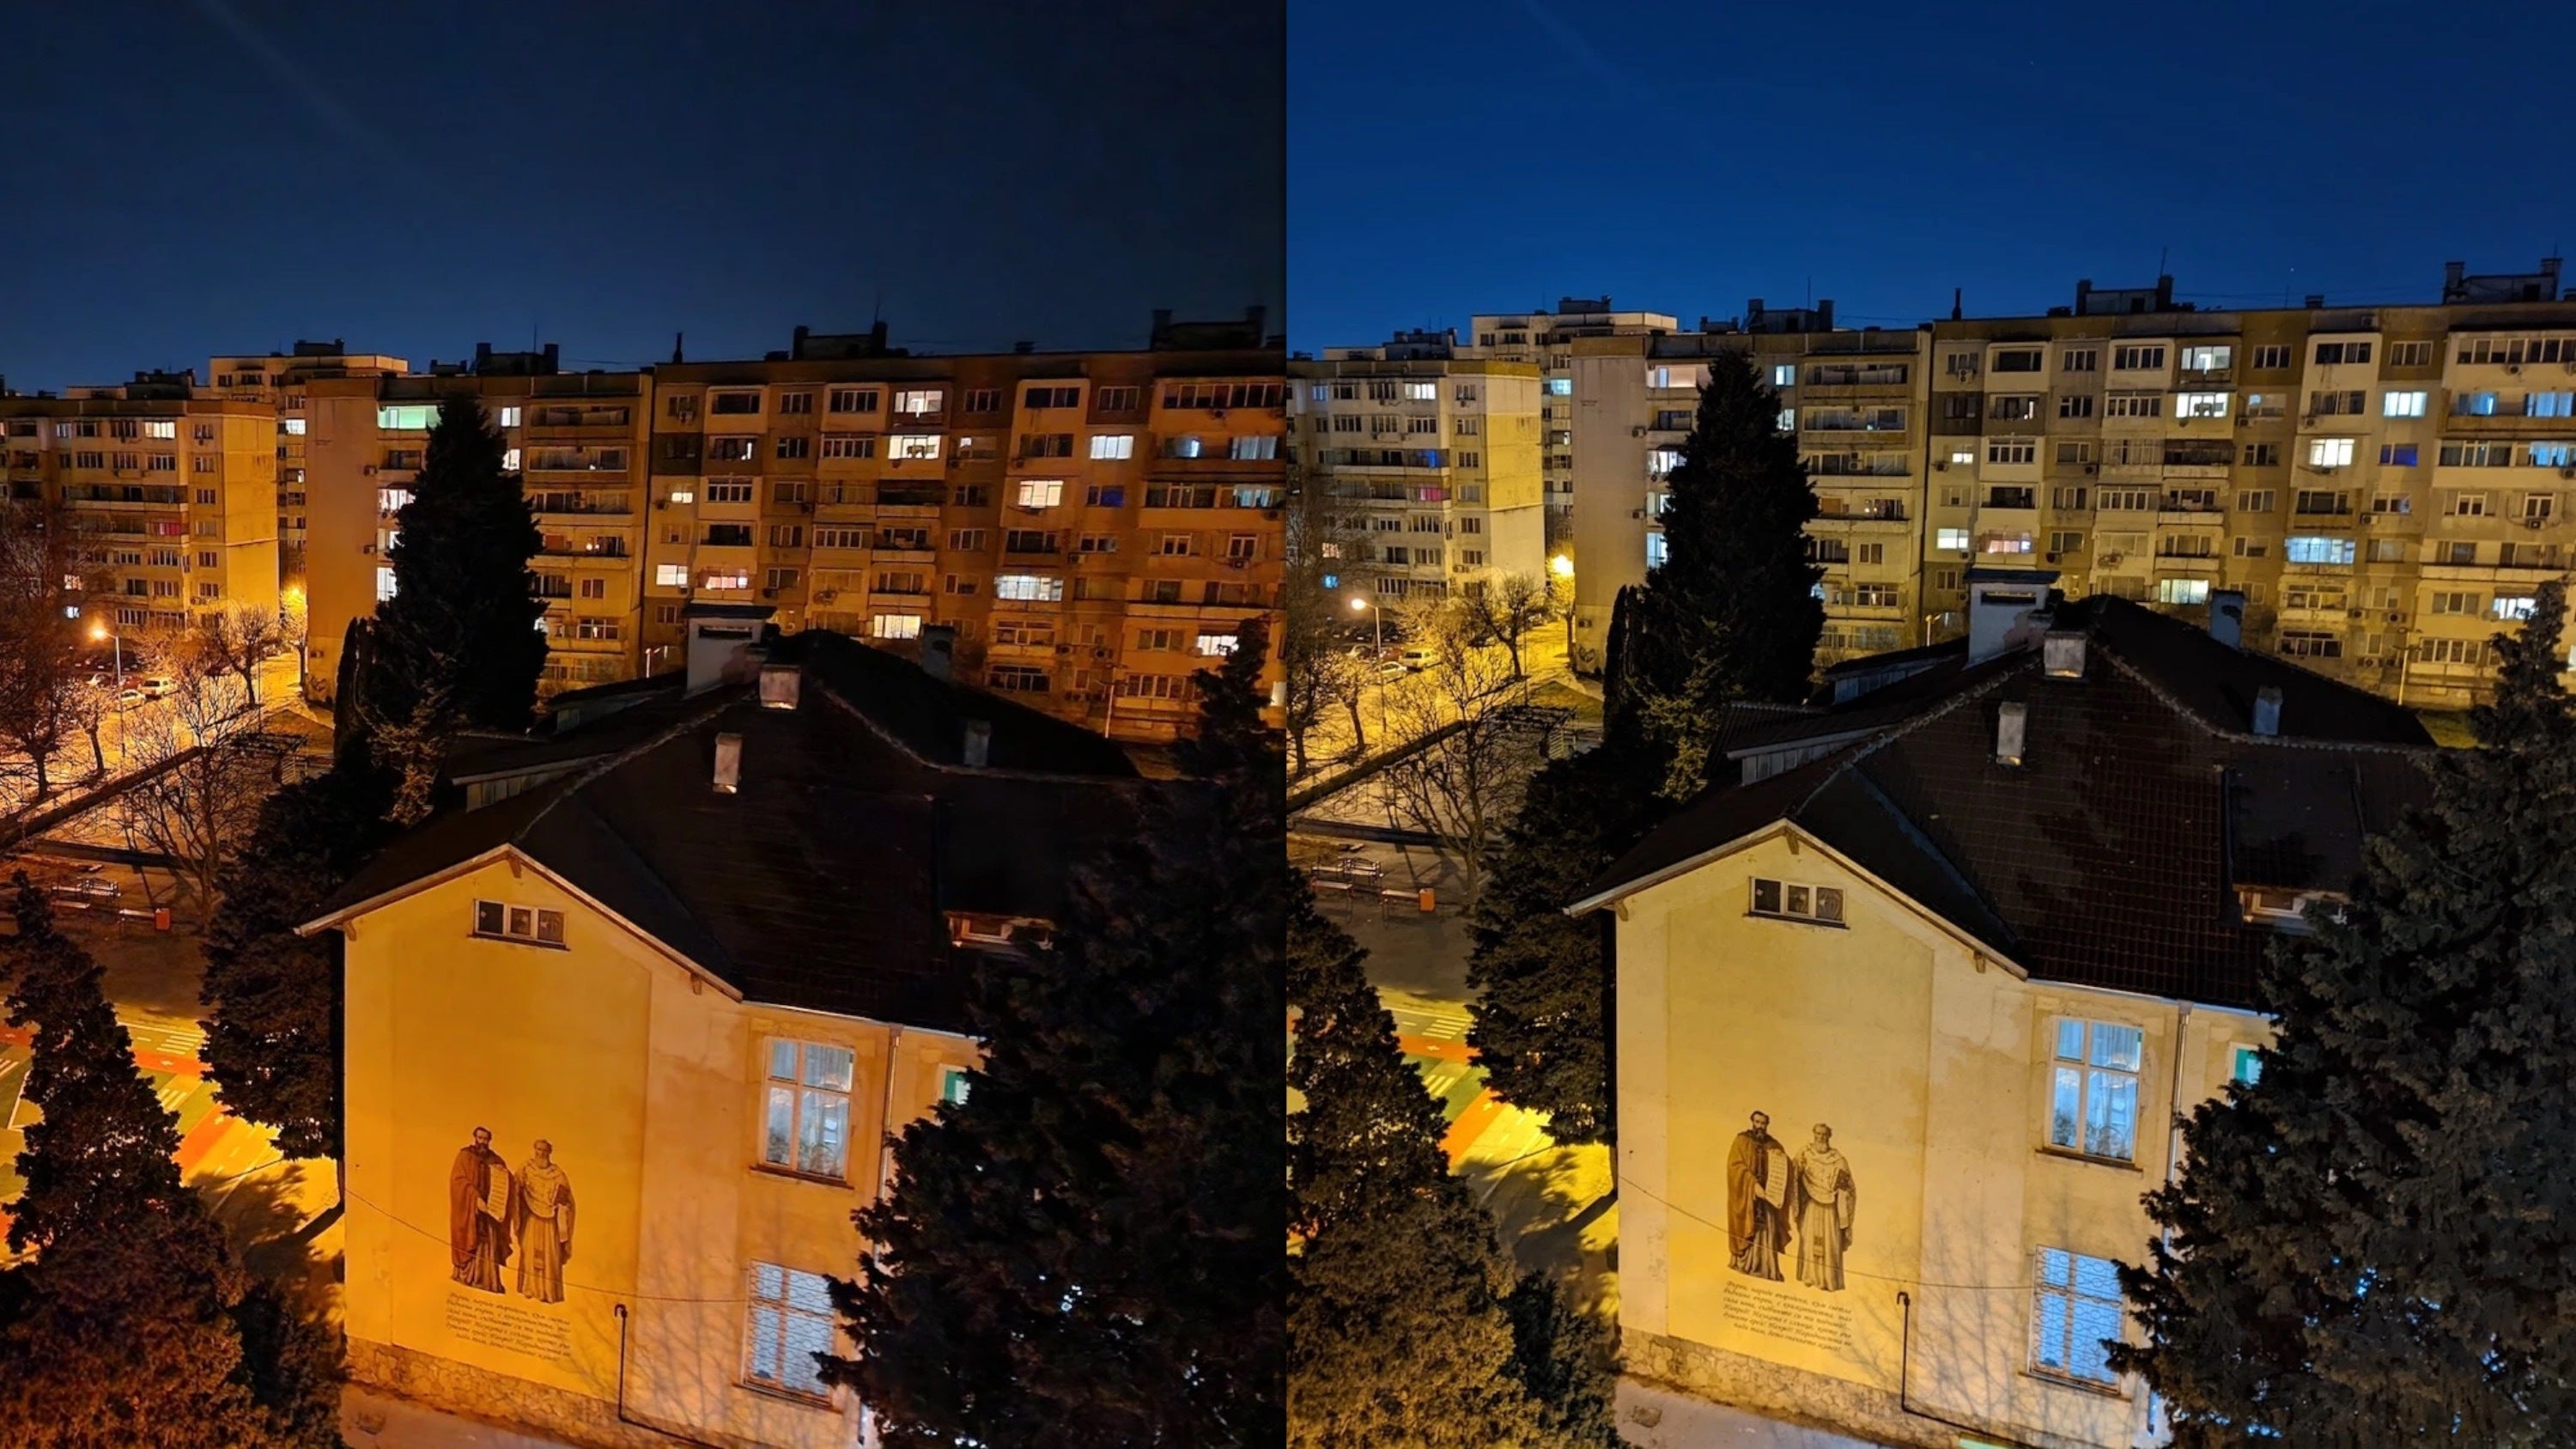 Our camera comparison shows the Pixel 6 Pro takes cleaner low-light photos than the S22 Ultra. The Pixel&#039;s photo is on the right. - Galaxy S22, S22+, S22 Ultra: Only if Google Pixel 6 Pro didn’t exist…